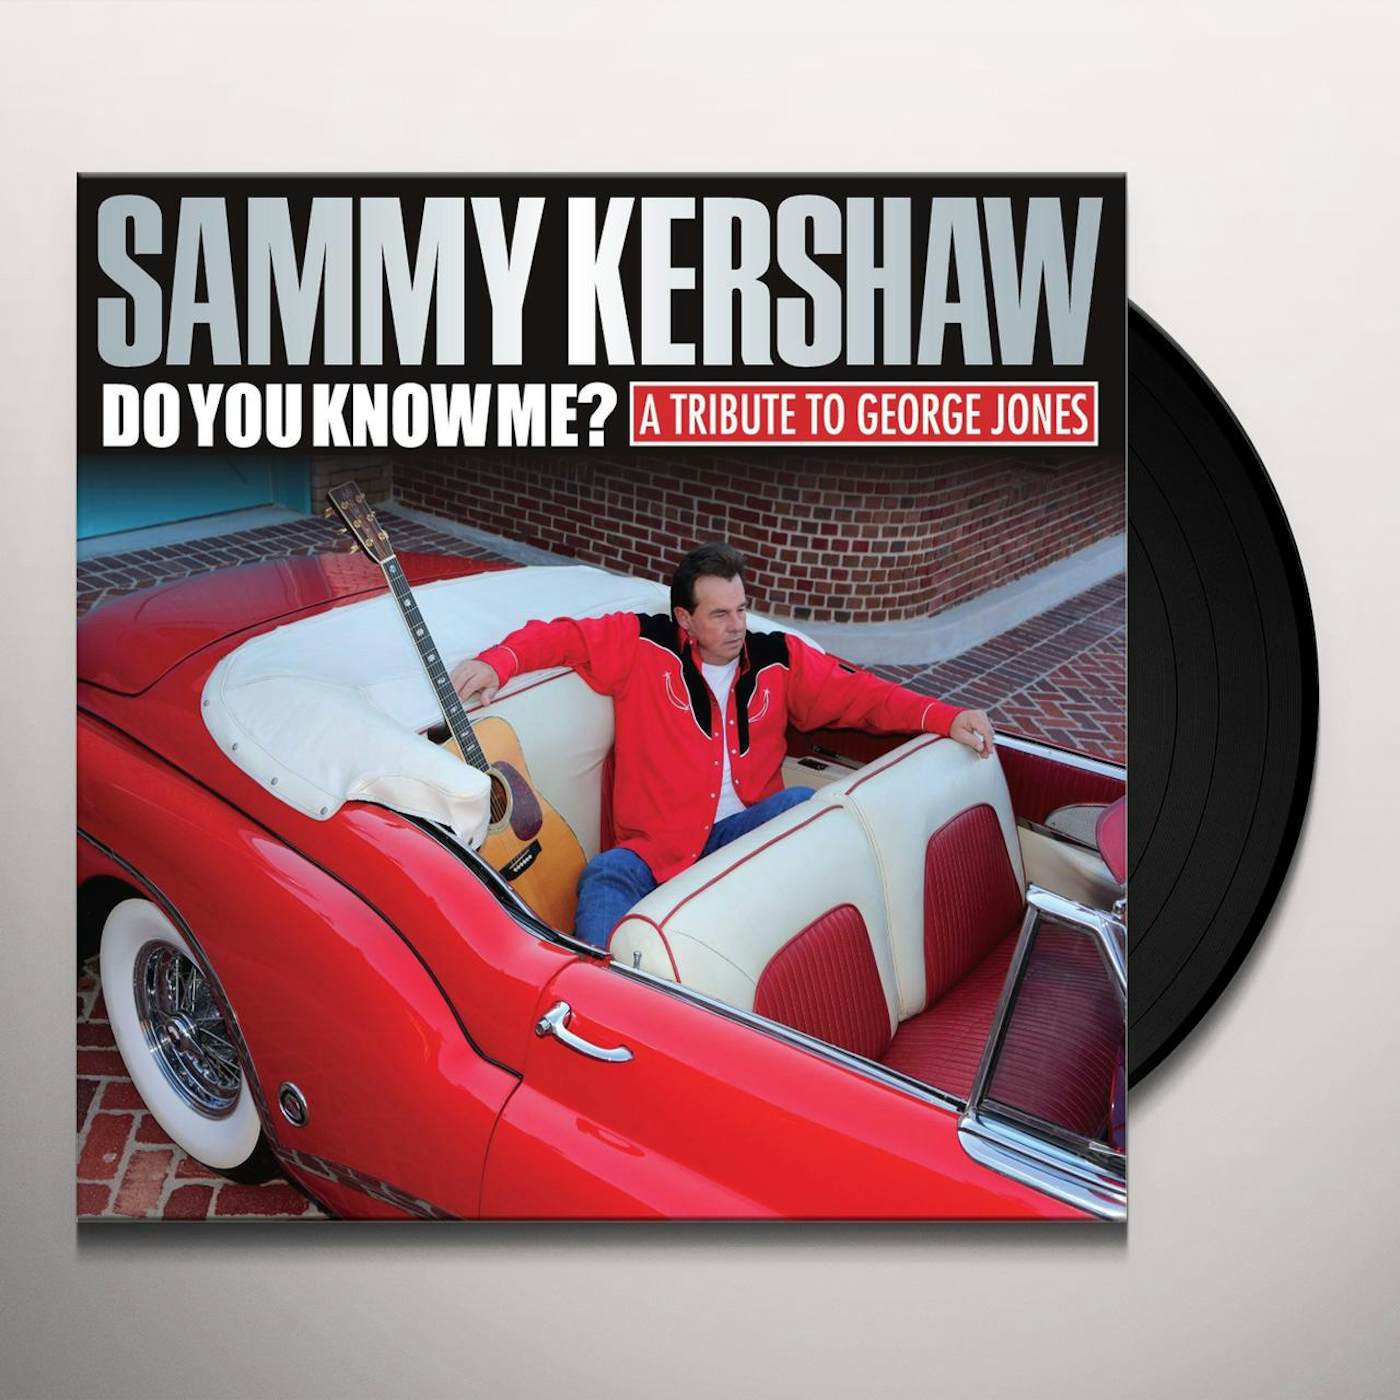 Sammy Kershaw DO YOU KNOW ME: A TRIBUTE TO GEORGE JONES Vinyl Record